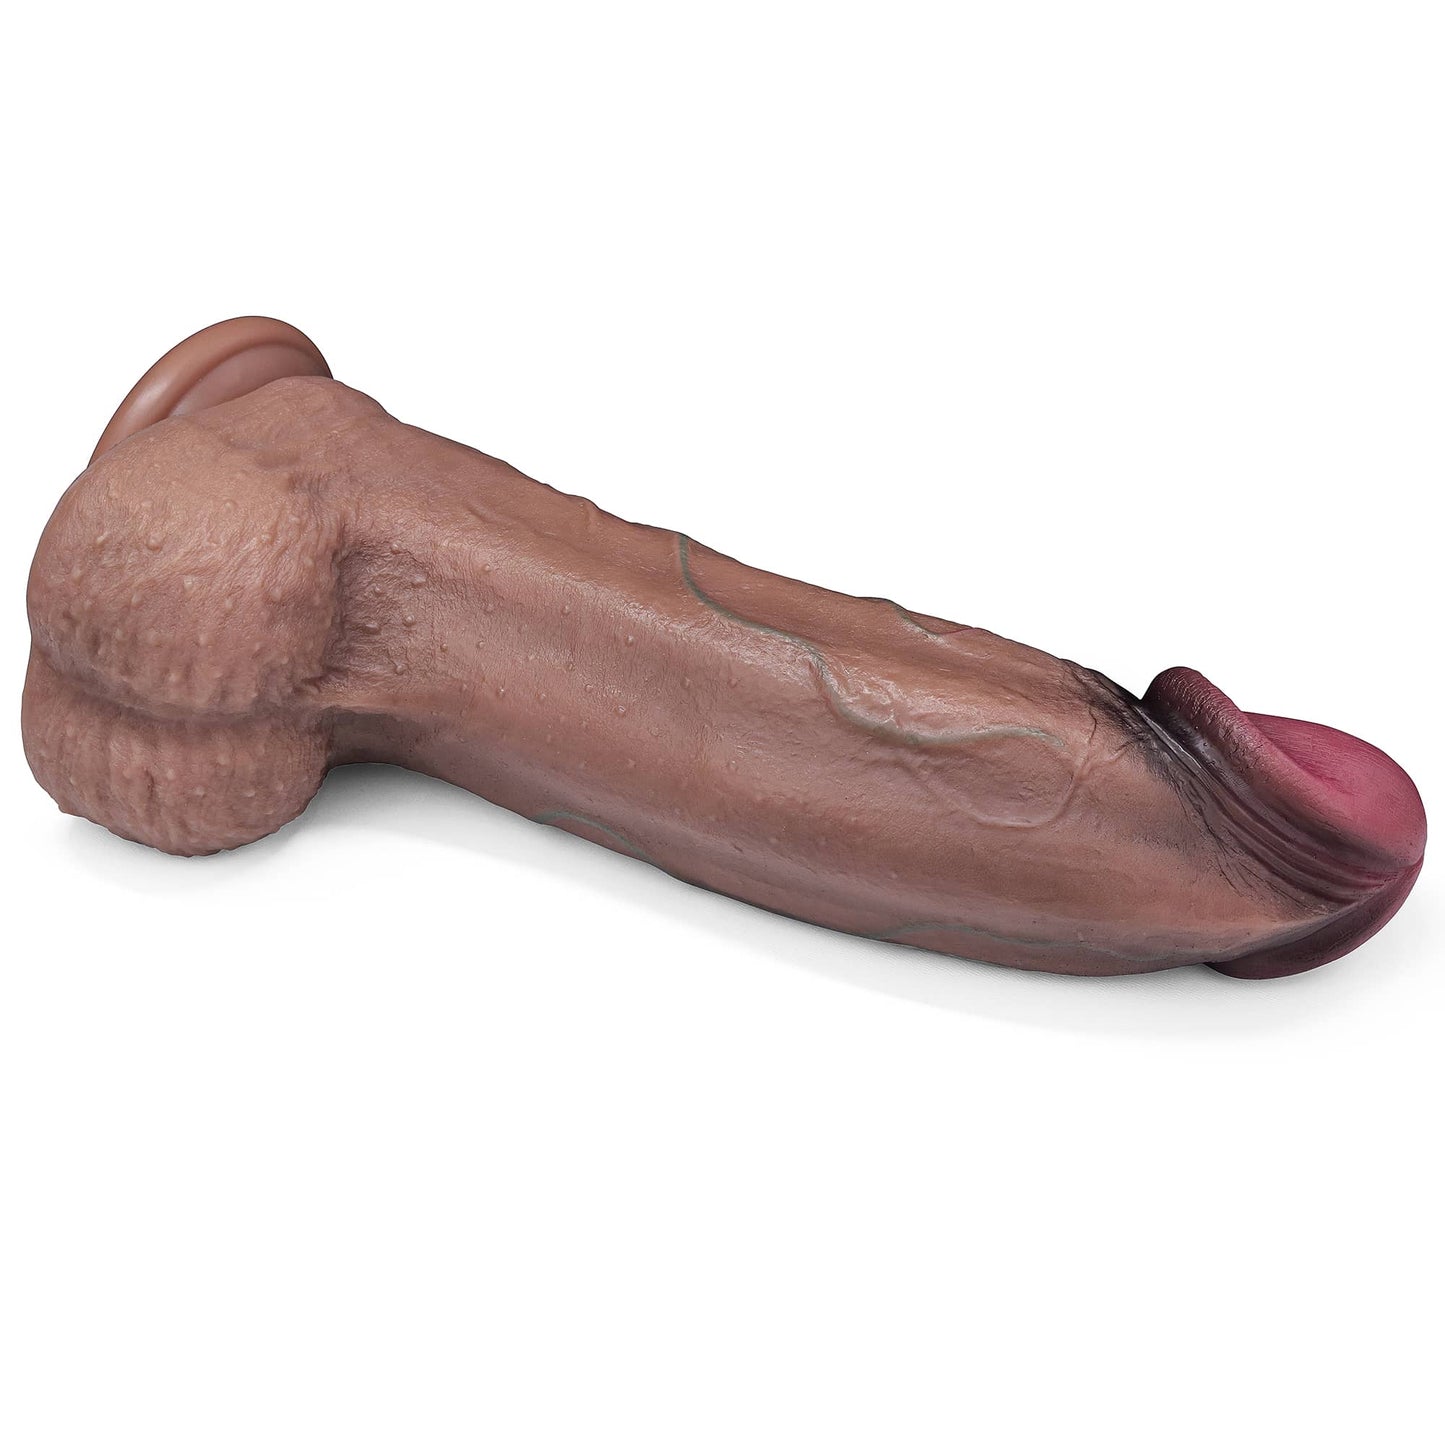 The 13 inches silicone realistic dildo lies flat and shows its balls